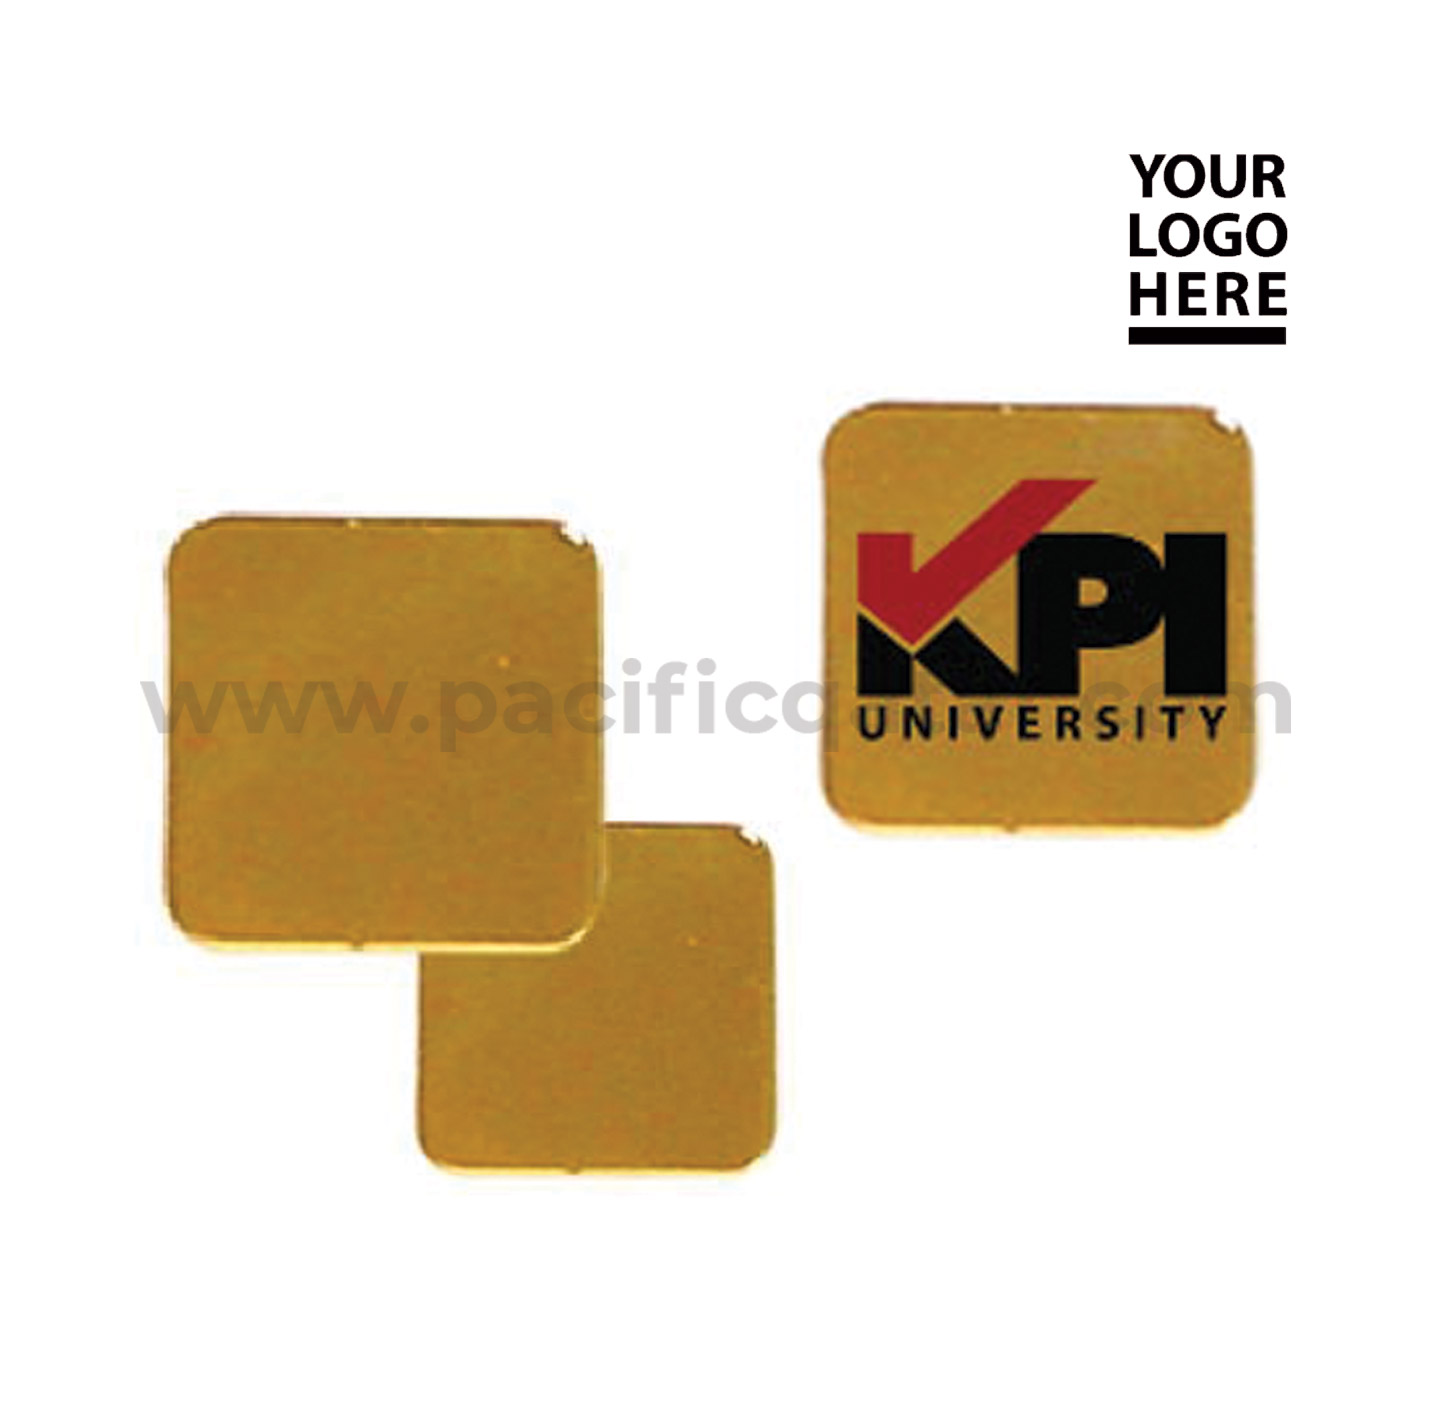 Square Flat Metal Badges with logo